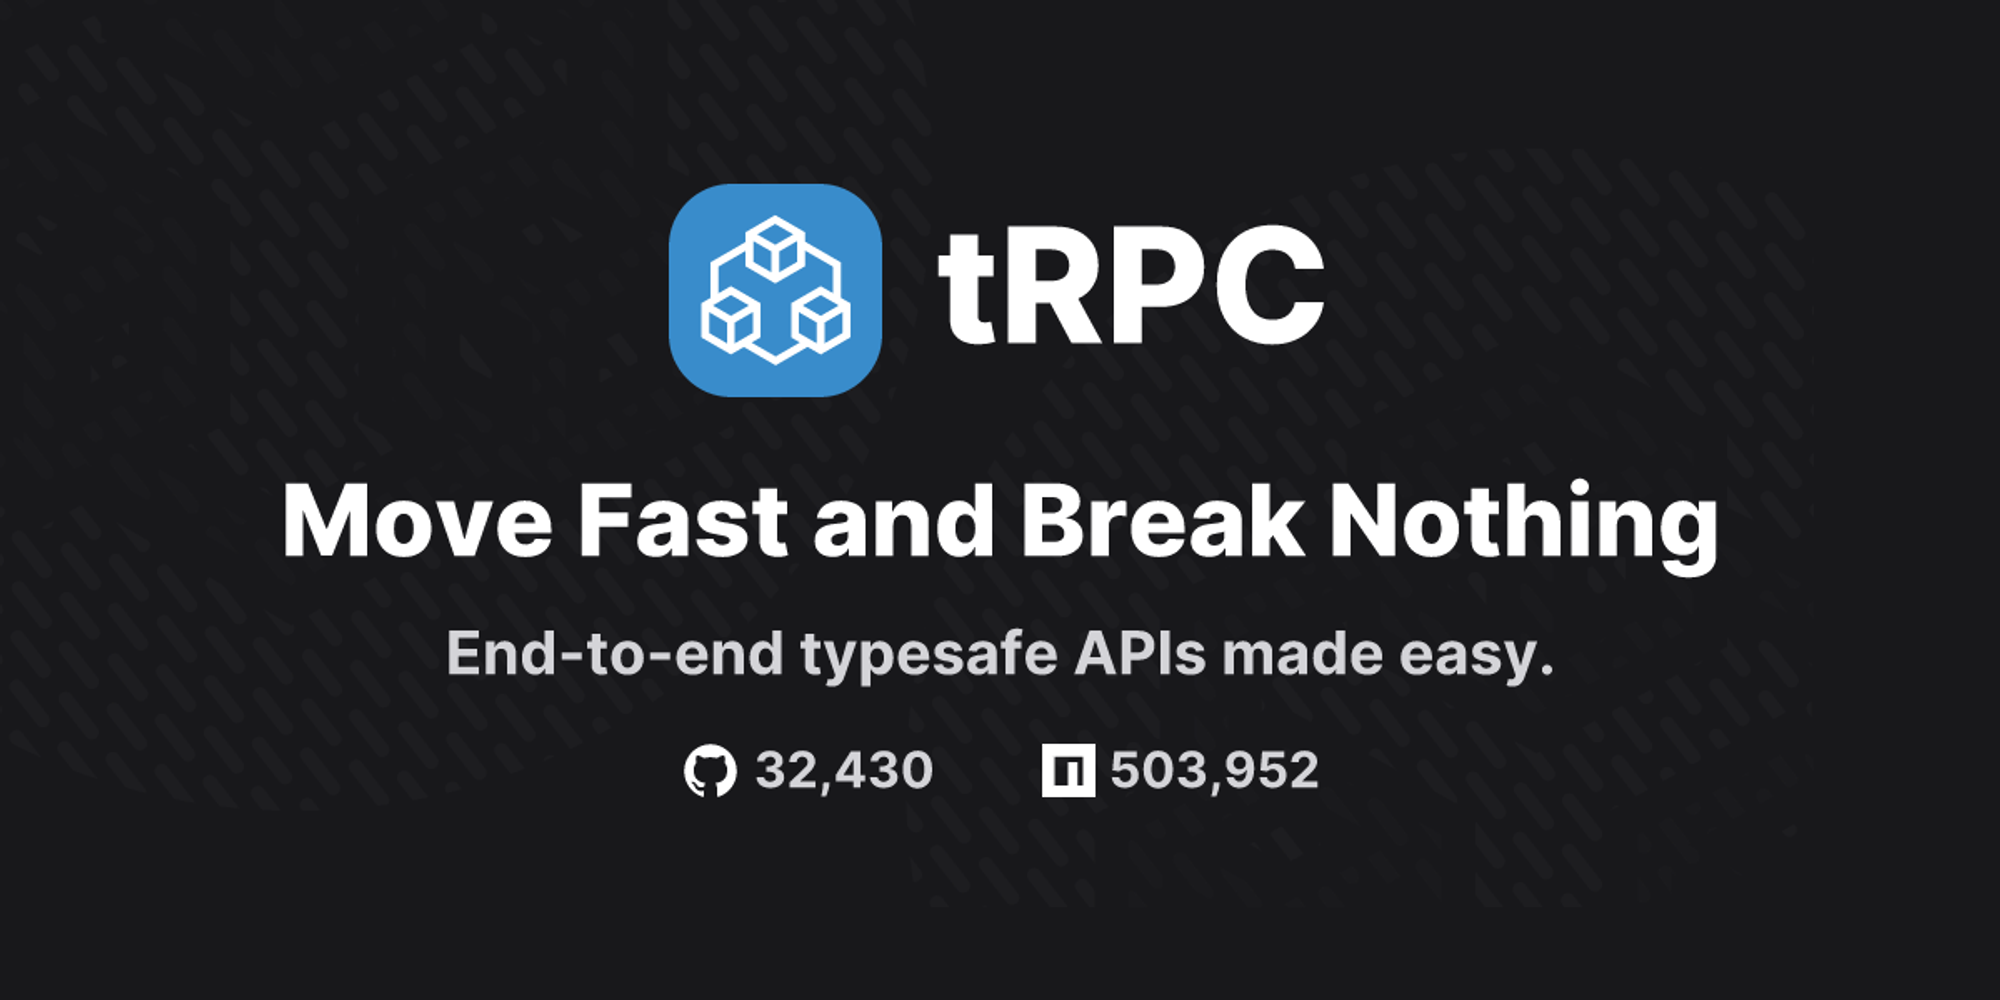 tRPC - Move Fast and Break Nothing. End-to-end typesafe APIs made easy. | tRPC